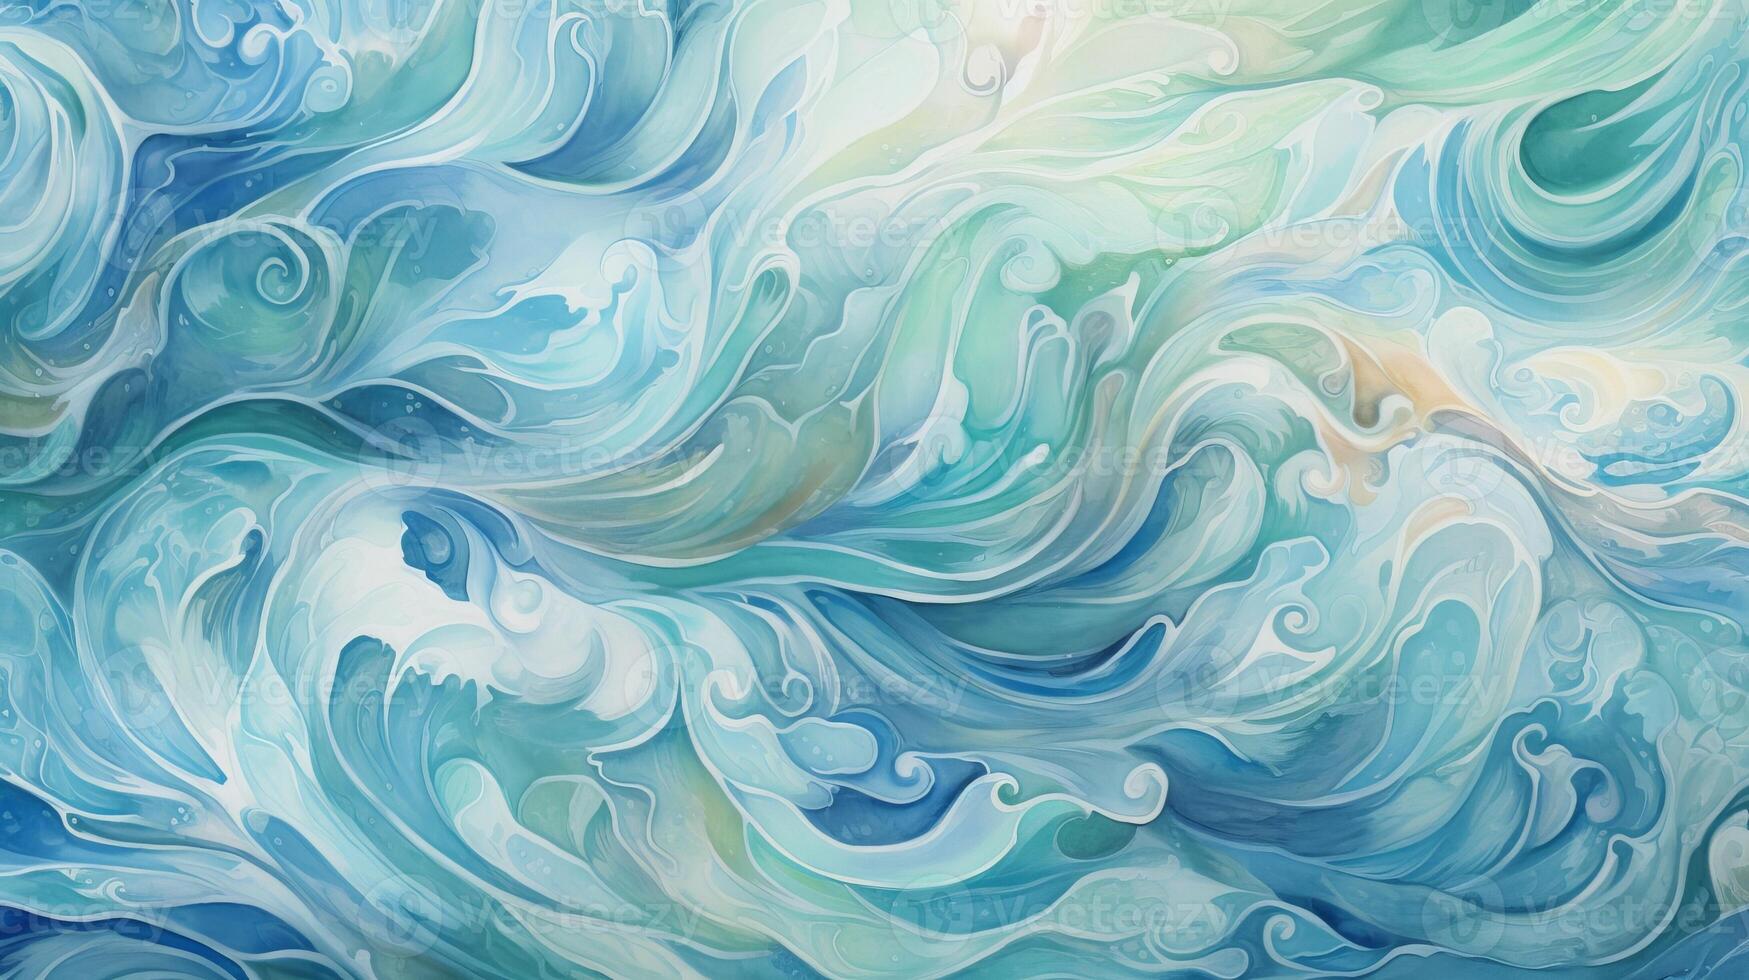 abstract wave painting